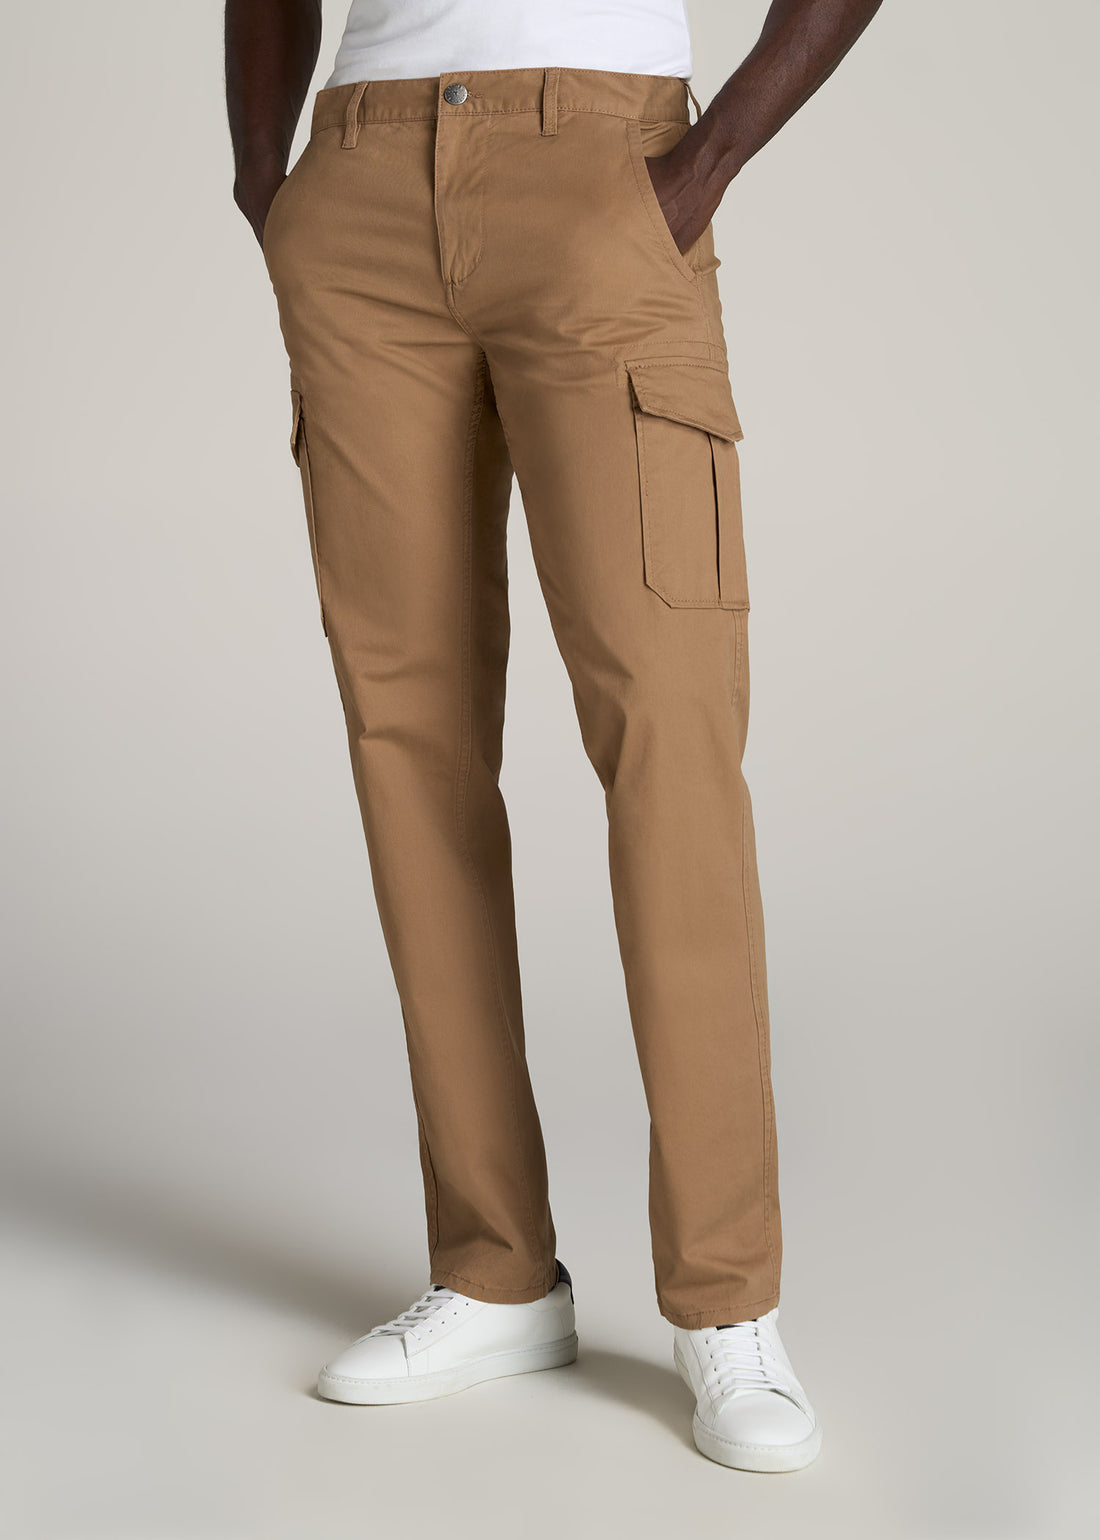 Tall man wearing stretch twill cargo pants in light brown.